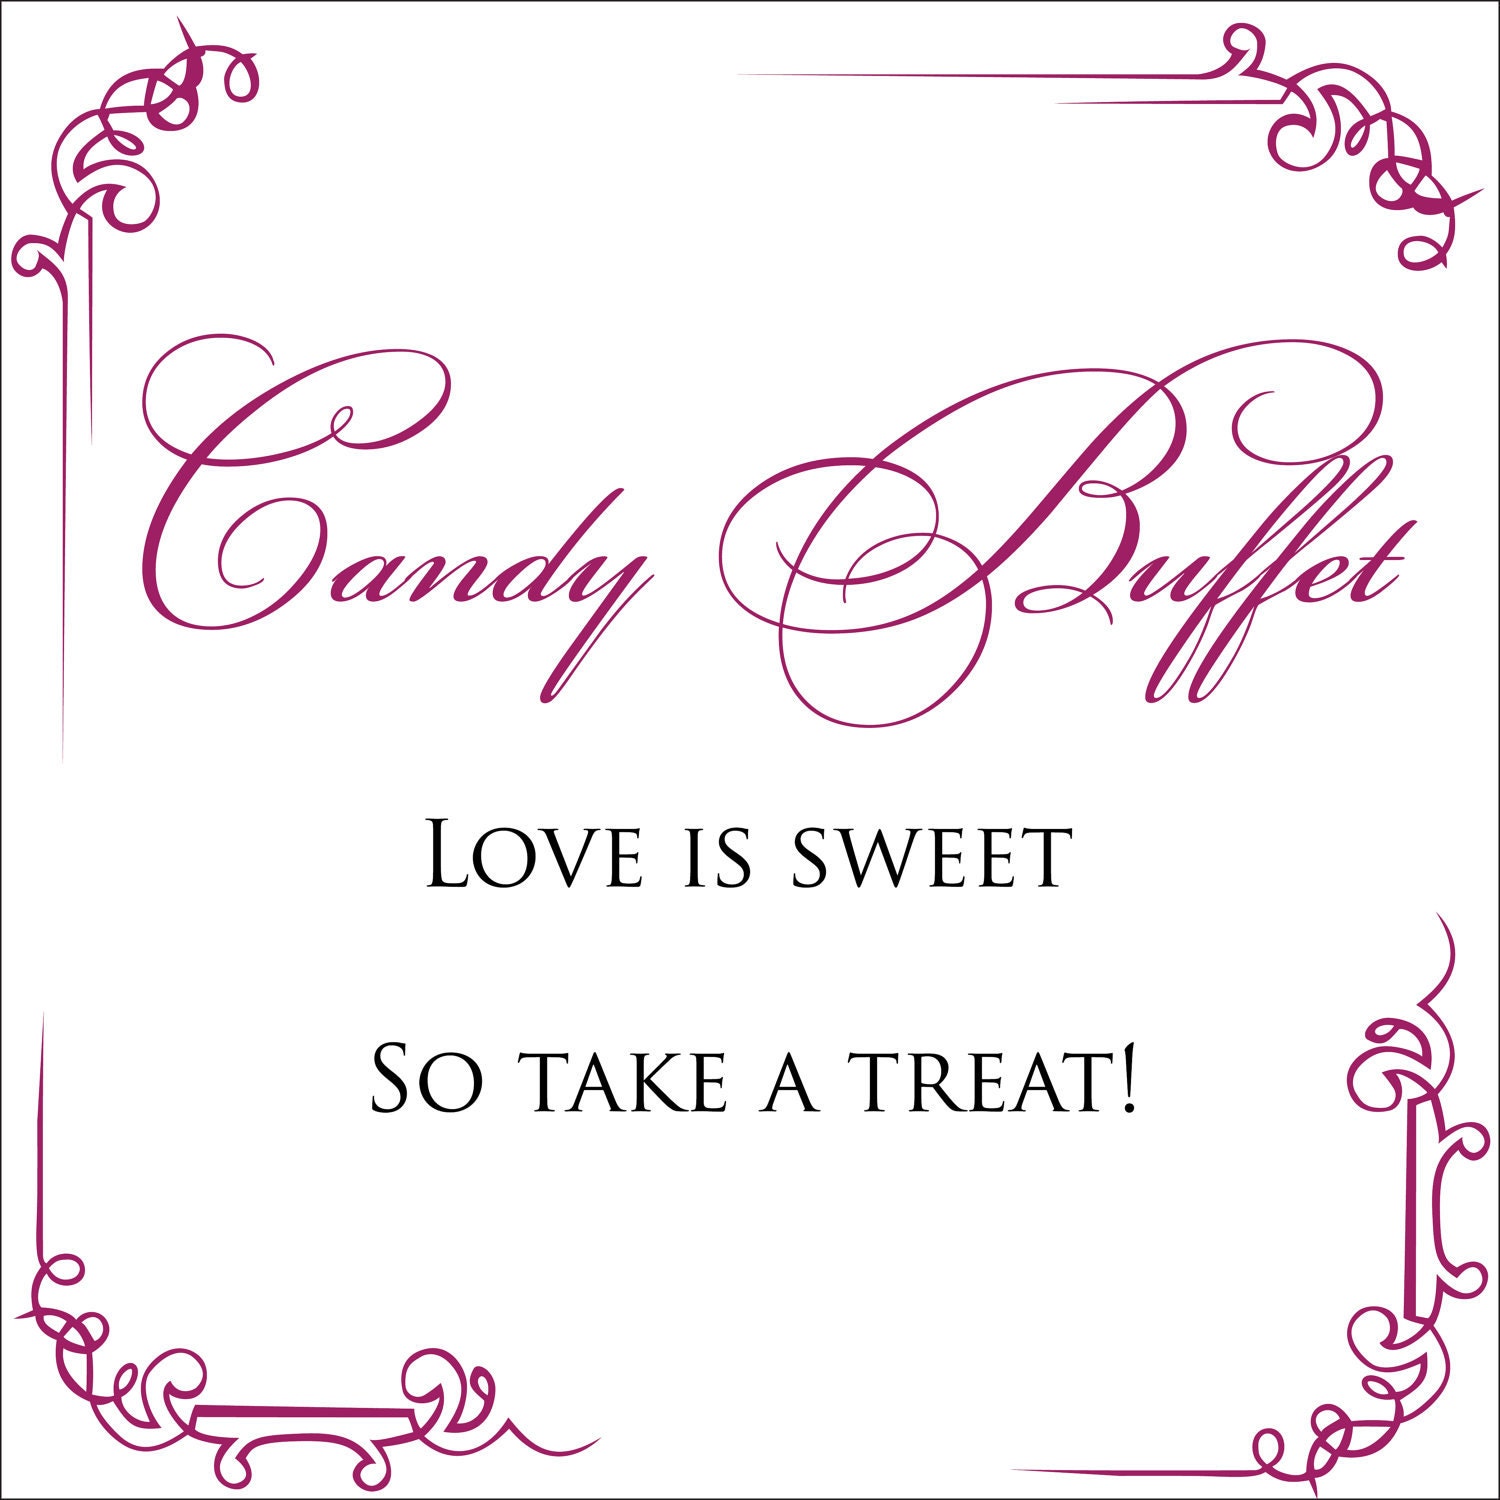 Candy Buffet Signs For Weddings